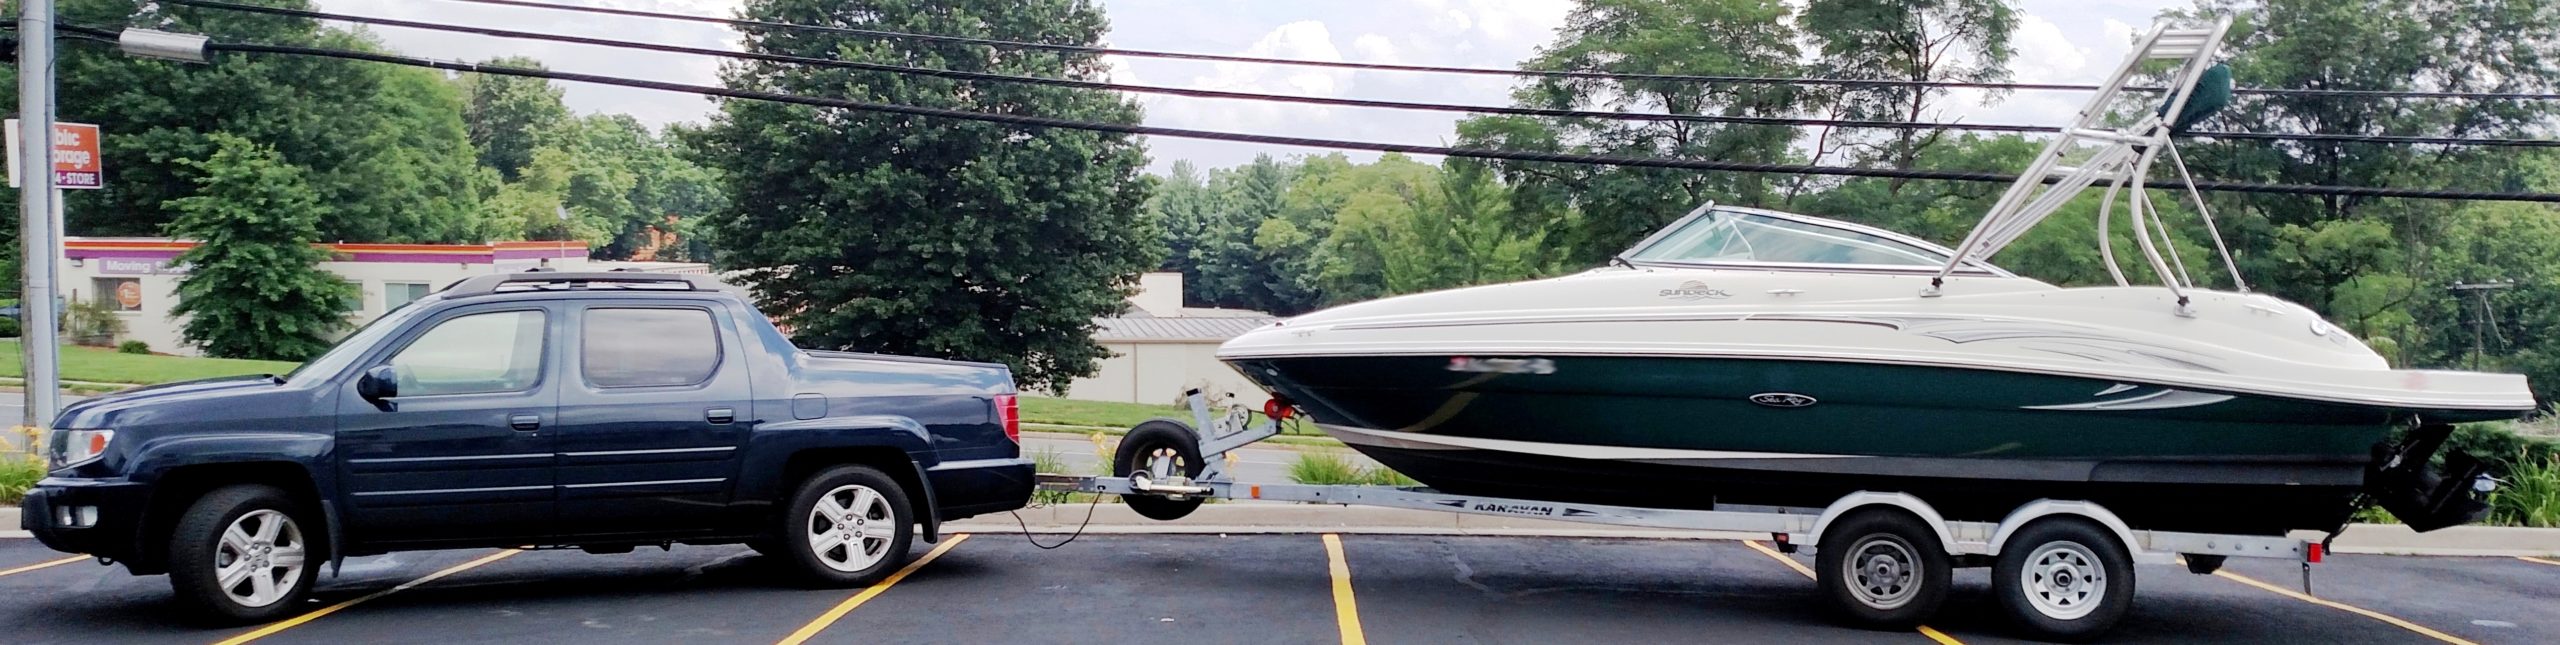 7 Boat Towing Tips